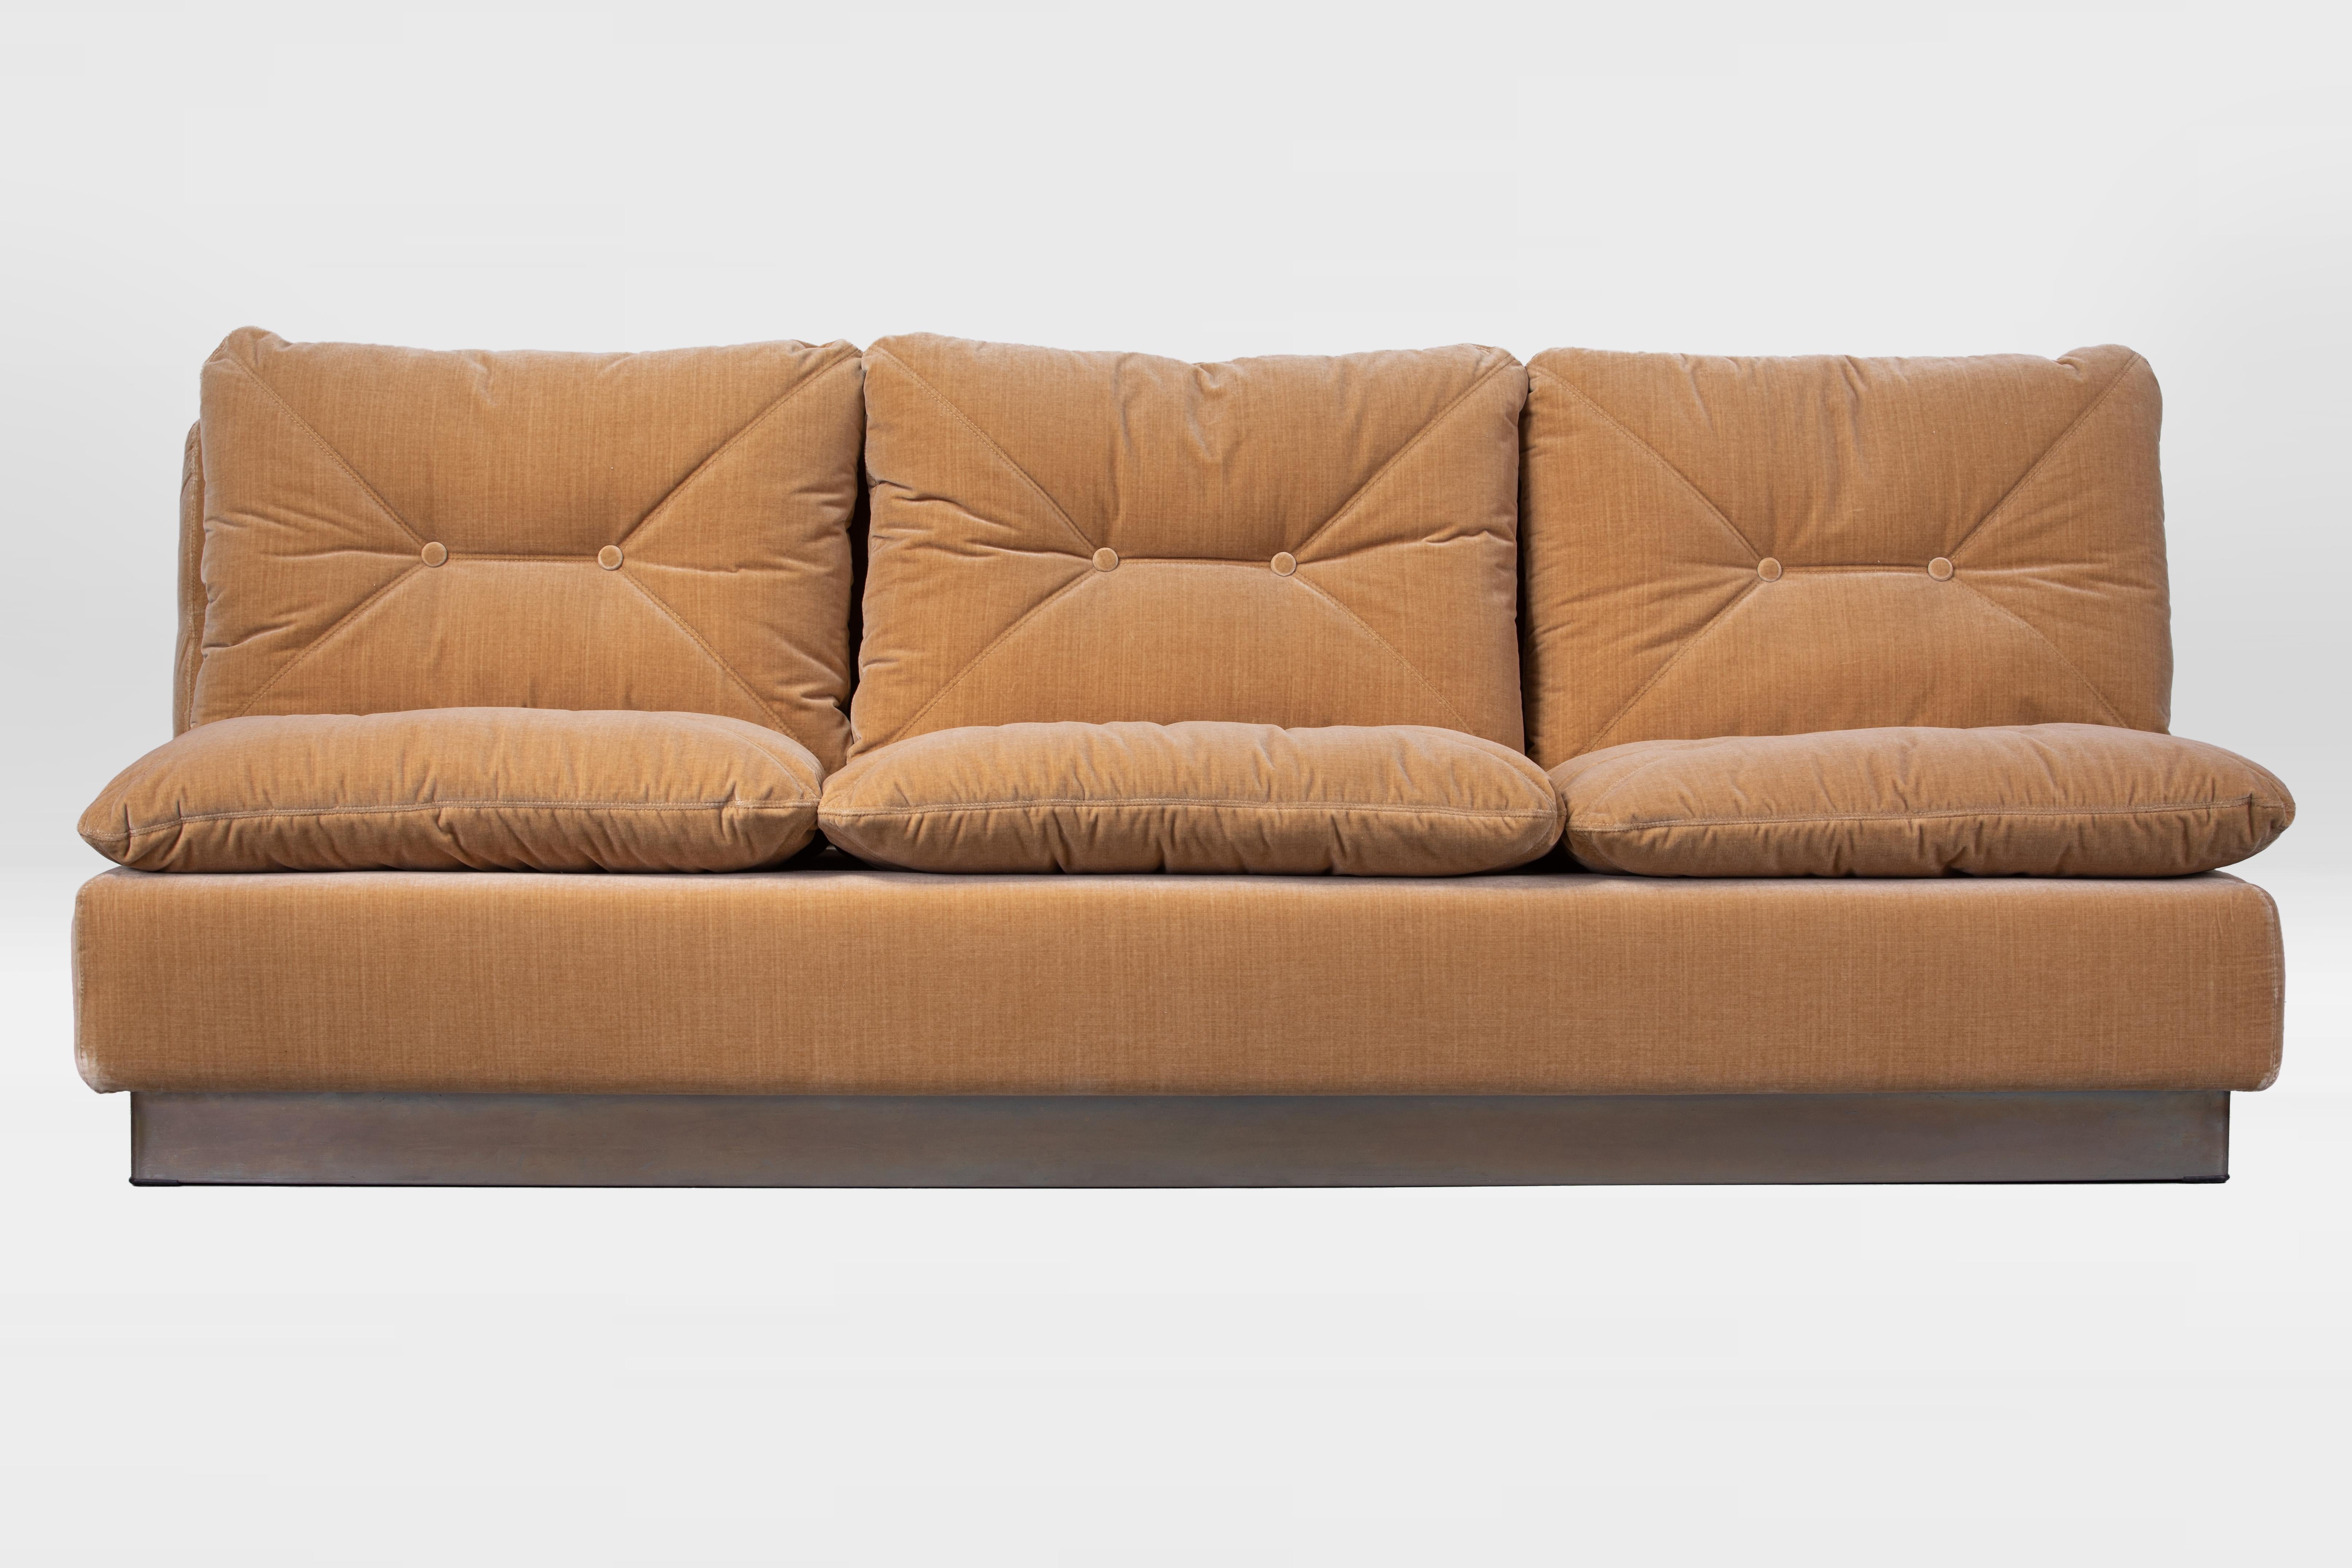 Saporiti Italia Sofa, Italy 1970s, Reupholstered in Kerry Joyce Velvet In Good Condition For Sale In Torino, Piemonte